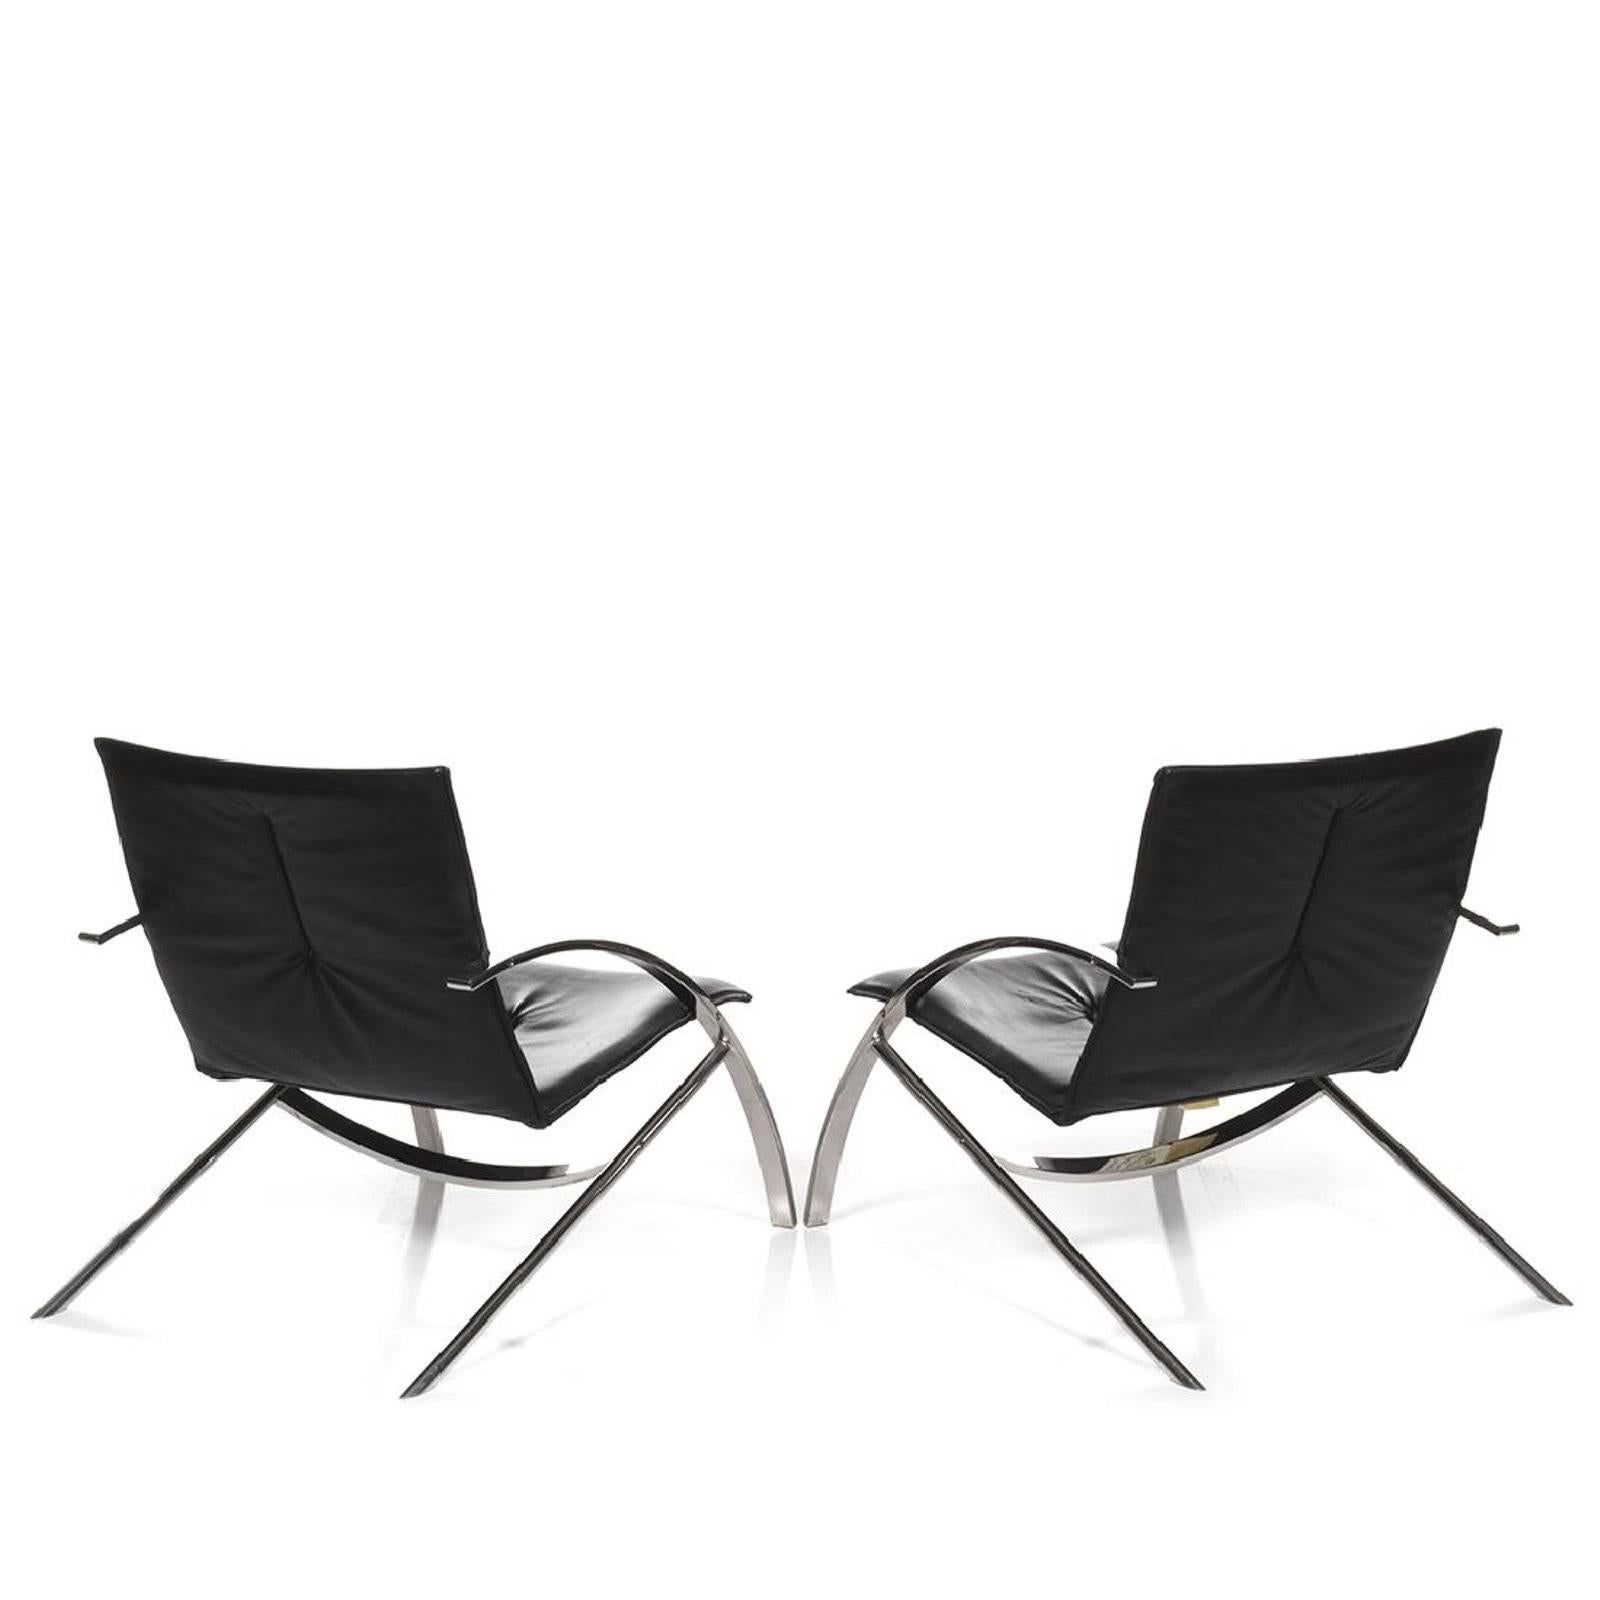 Pair of Modern midcentury Arco lounge chairs by Paul Tuttle for Arconas .
Paul Tuttle described this extremely comfortable chairs his best pieces, pure calligraphy . 
These lounge chairs feature a solid chrome metal frame with comfortable leather